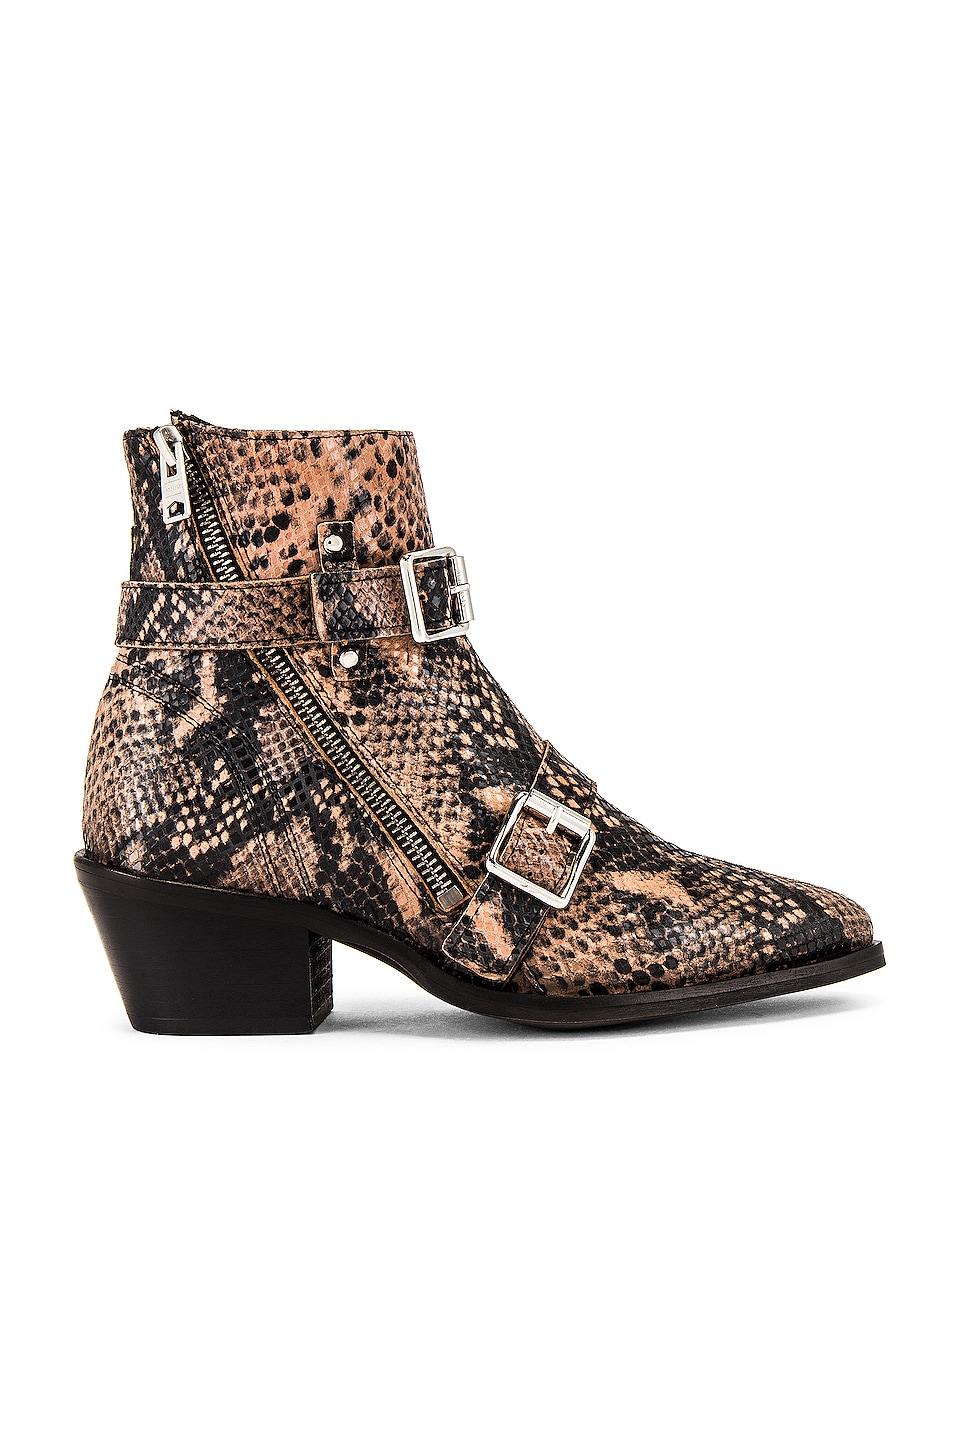 ALLSAINTS Lior Bootie in Taupe Snake | REVOLVE